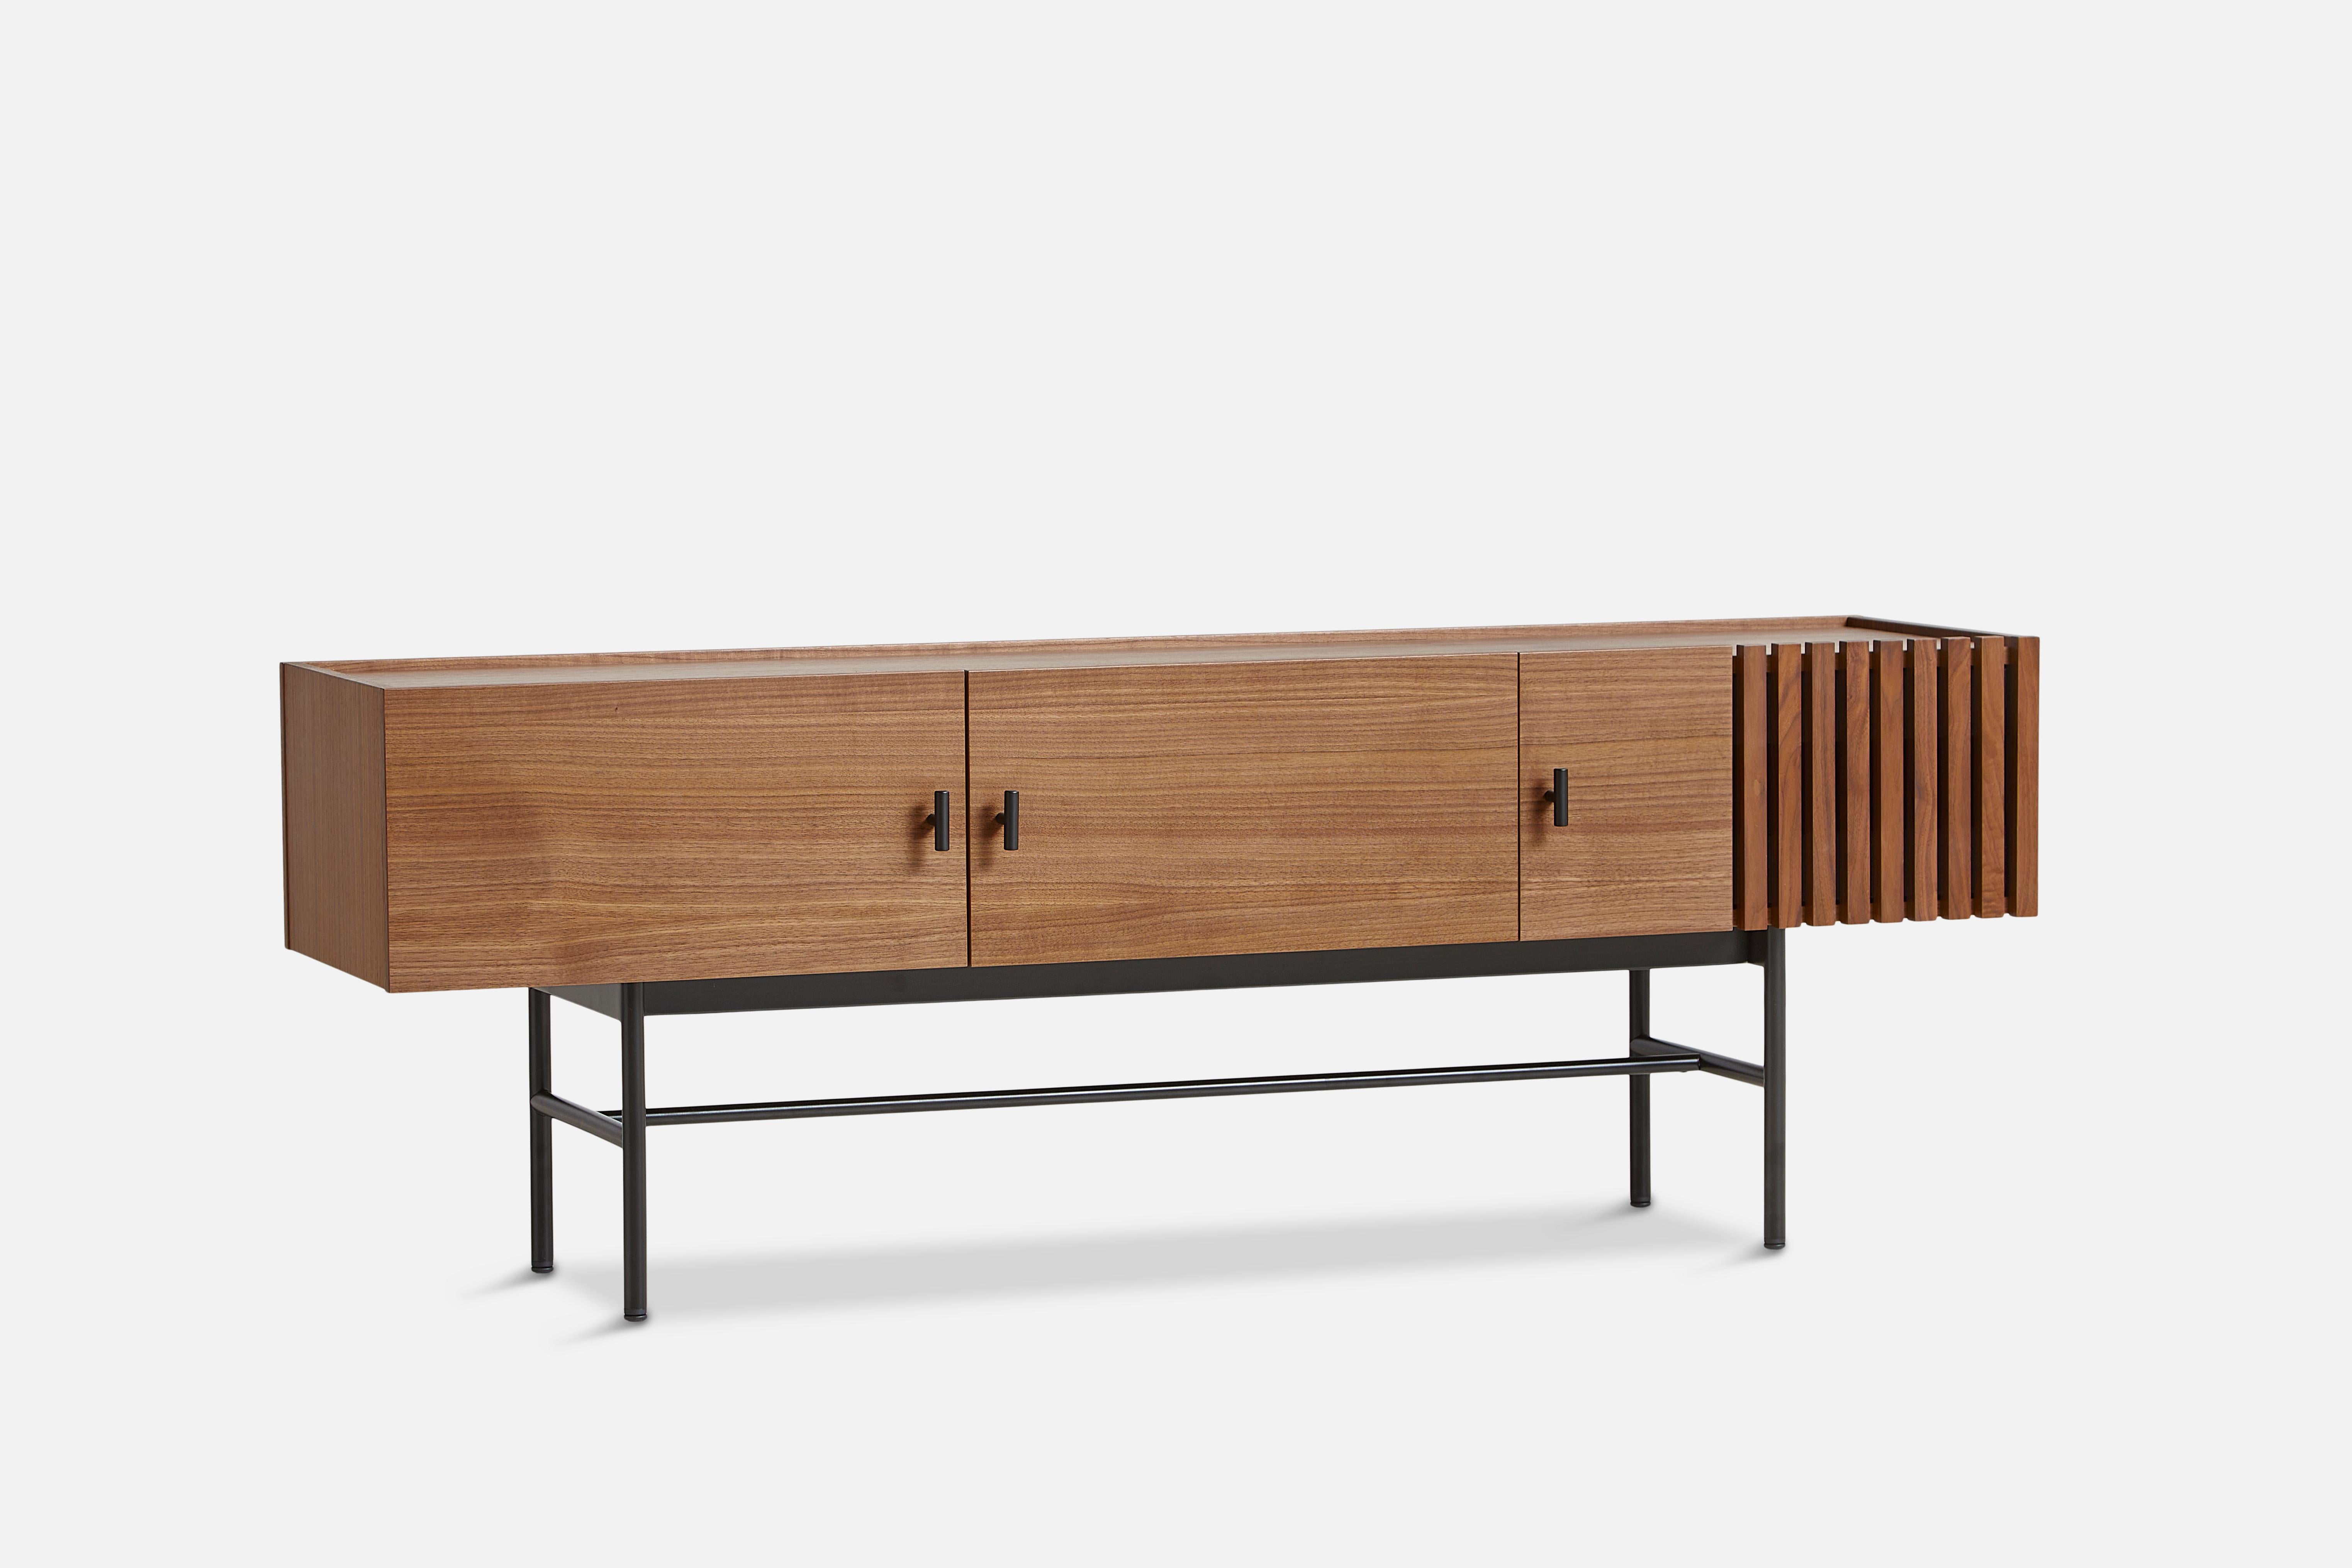 Walnut array low sideboard 150 leg frame by Says Who
Materials: walnut, metal
Dimensions: D 37 x W 150 x H 53 cm
Also available in different colours and materials. Please contact us.

The founders, Mia and Torben Koed, decided to put their 30